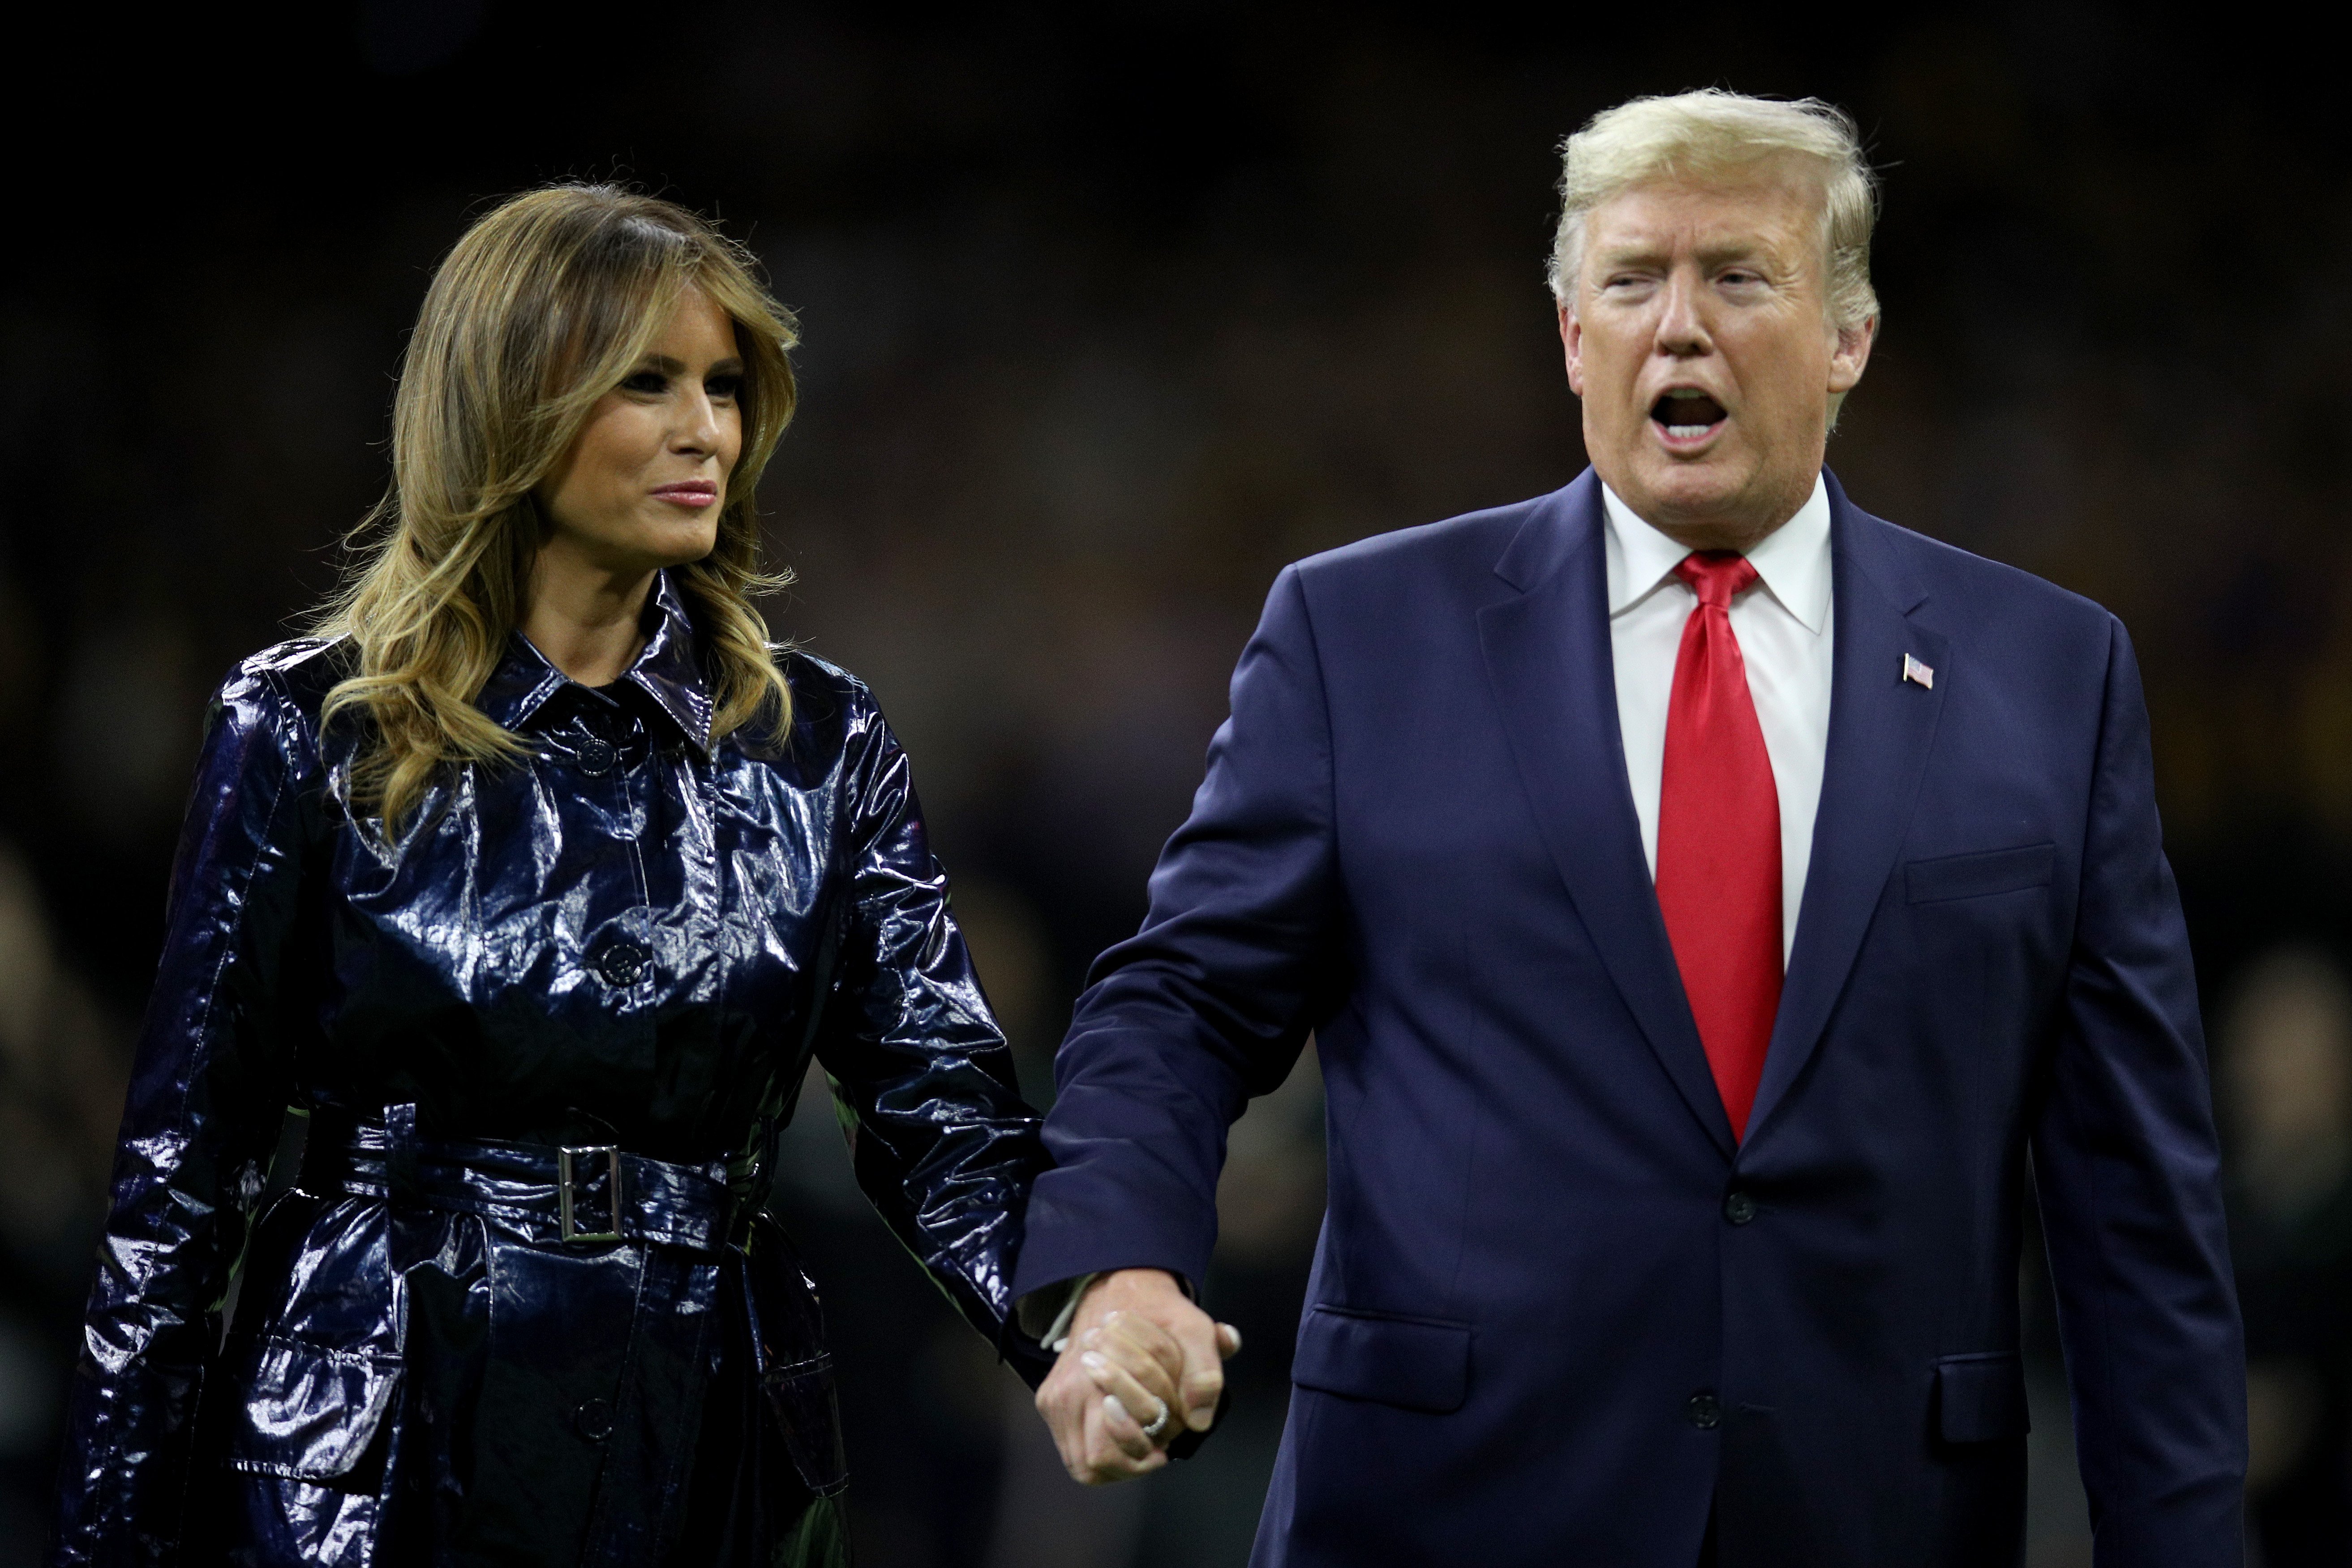  First Lady Melania Trump and U.S. President Donald Trump prior to the College Football Playoff National Championship game between the Clemson Tigers and the LSU Tigers at Mercedes Benz Superdome on January 13, 2020 |Photo: Getty Images